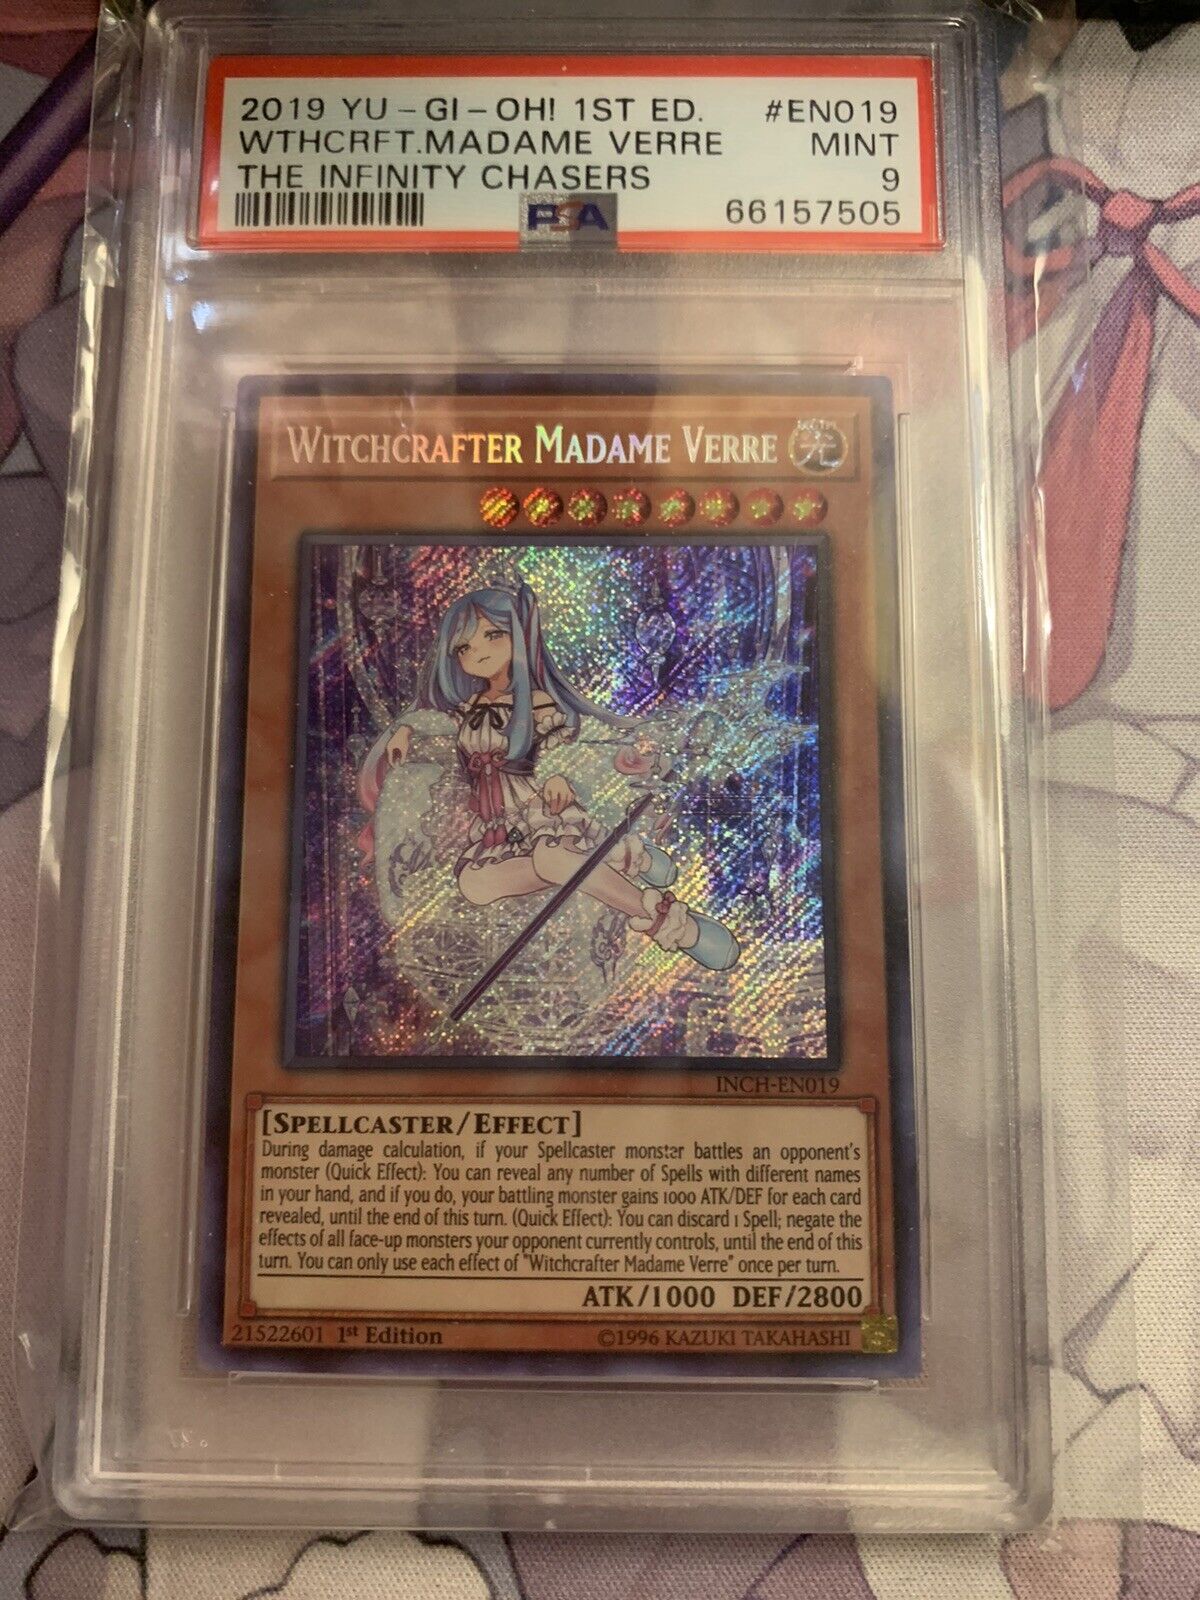 2019 Yu-Gi-Oh  The Infinity Chasers EN019 Witchcrafter Madame Verre PSA 9